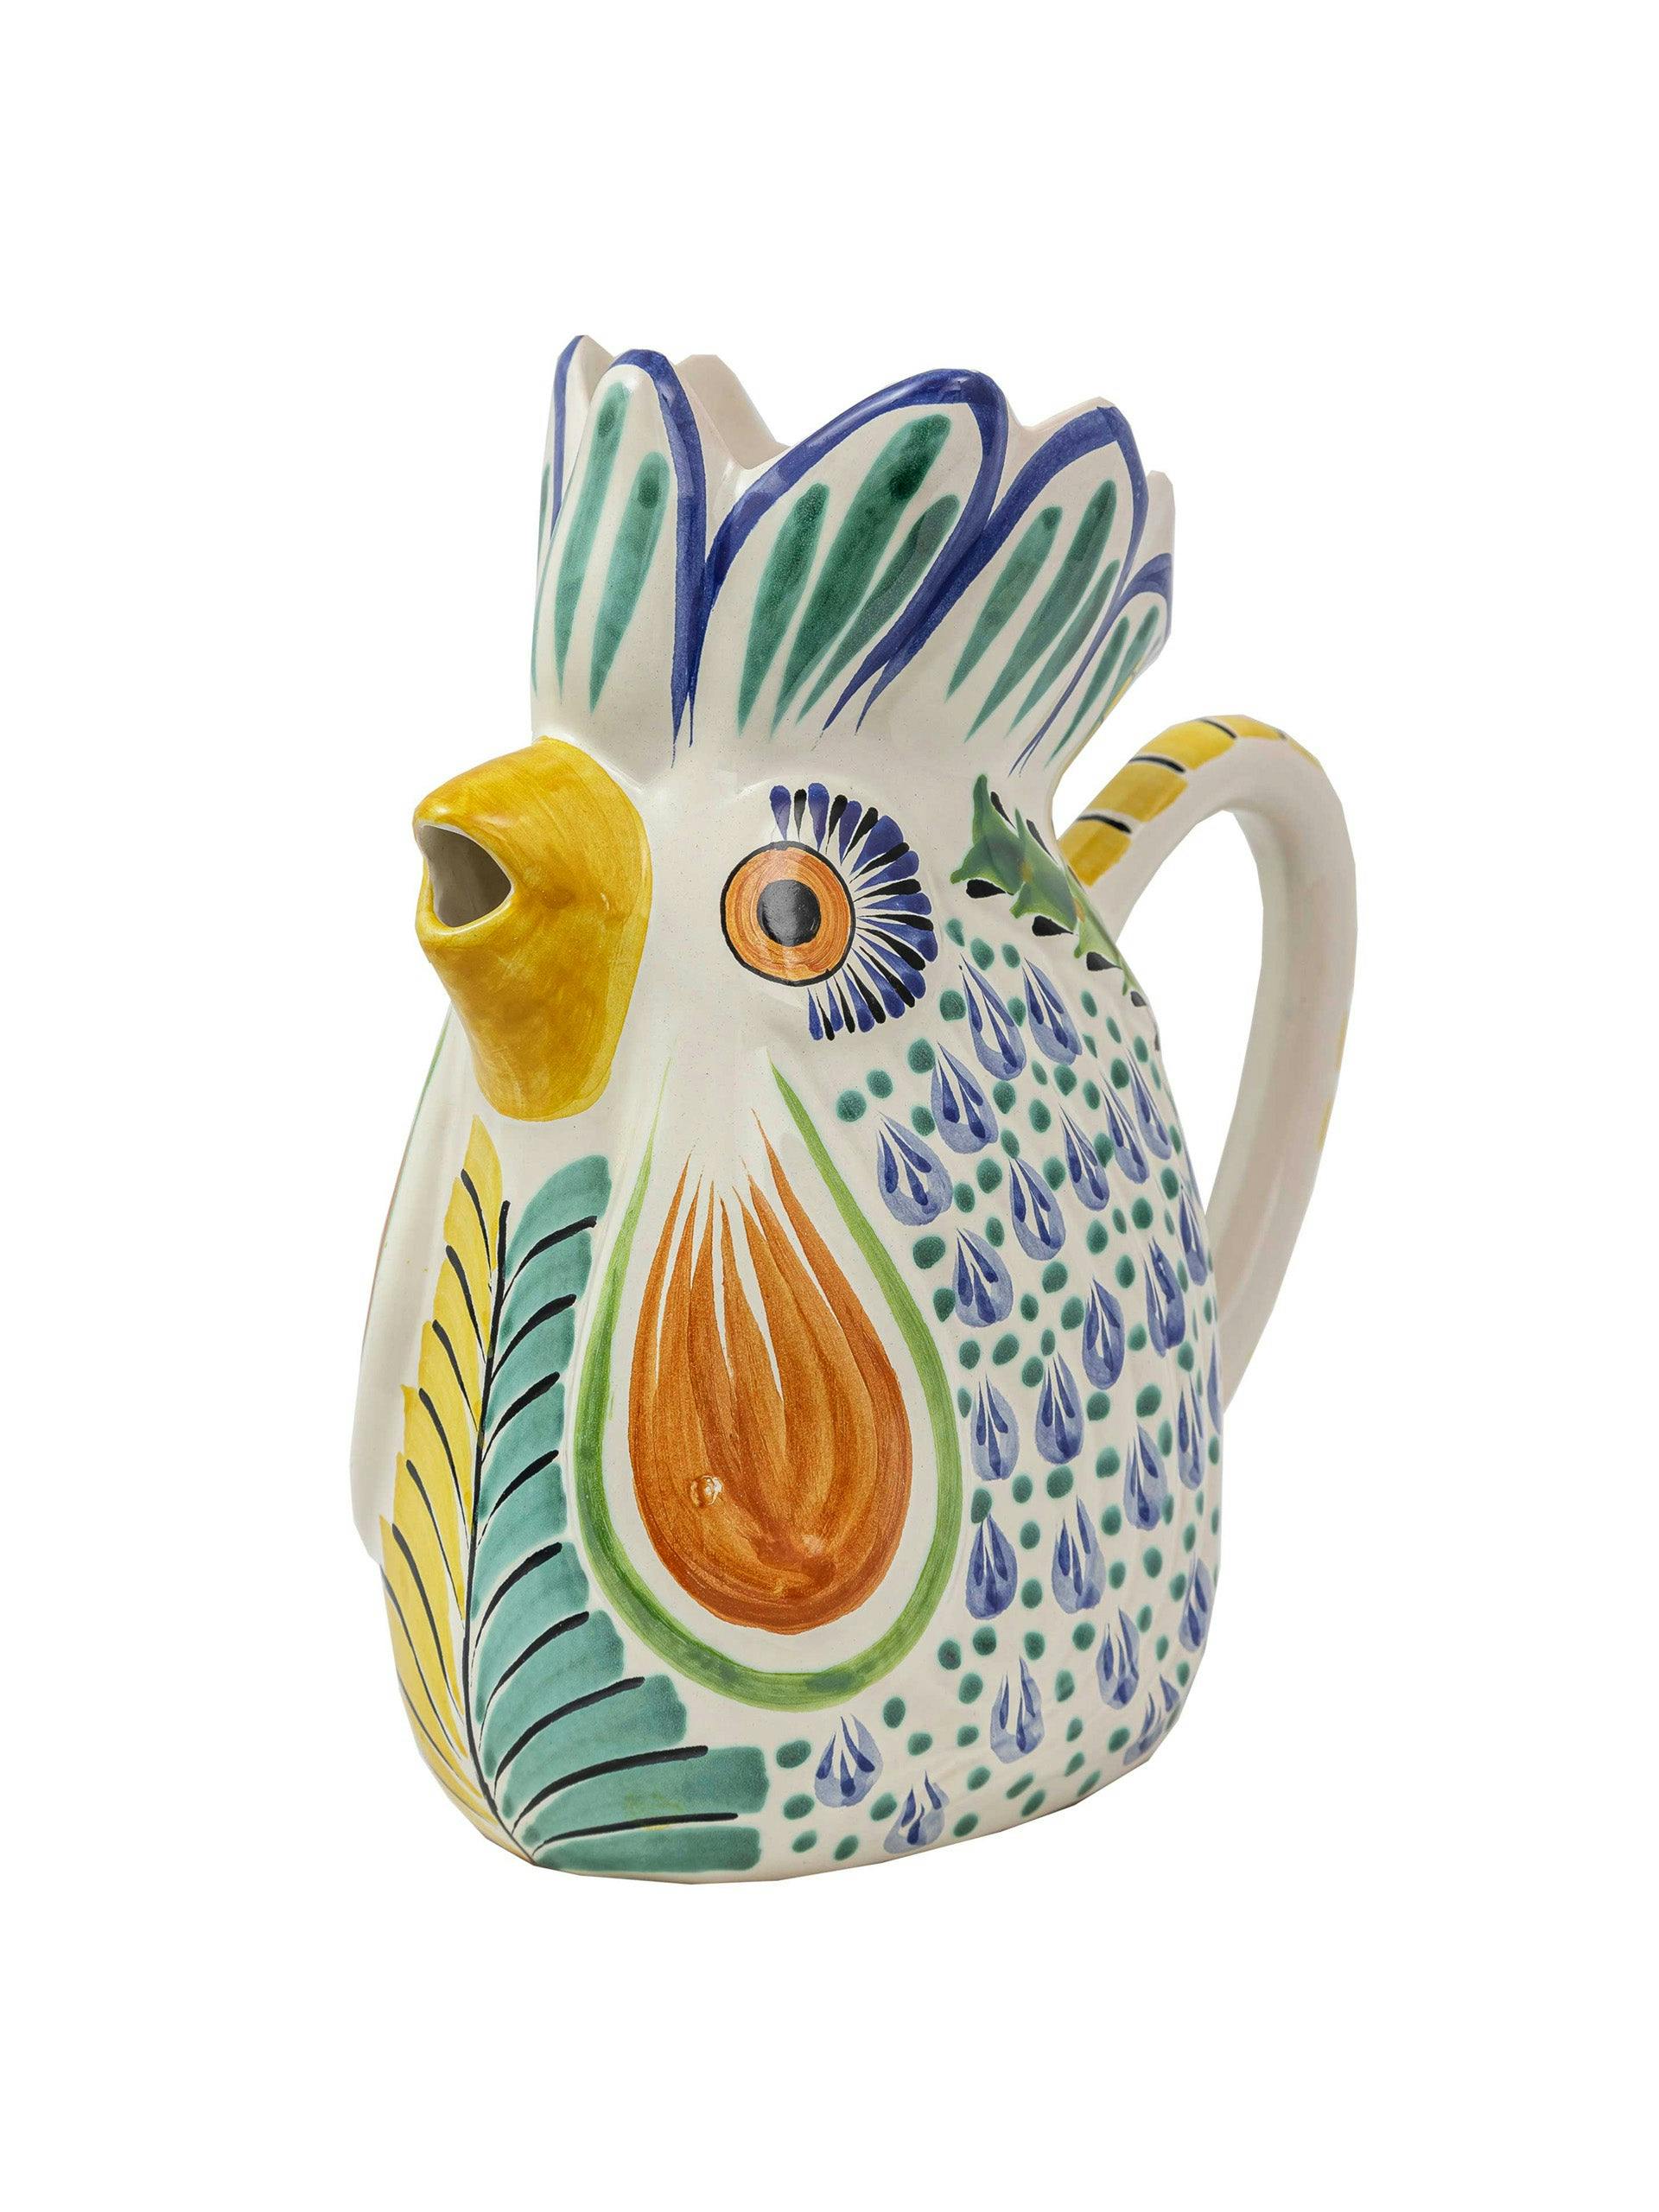 Rooster water pitcher in blue, green and aqua